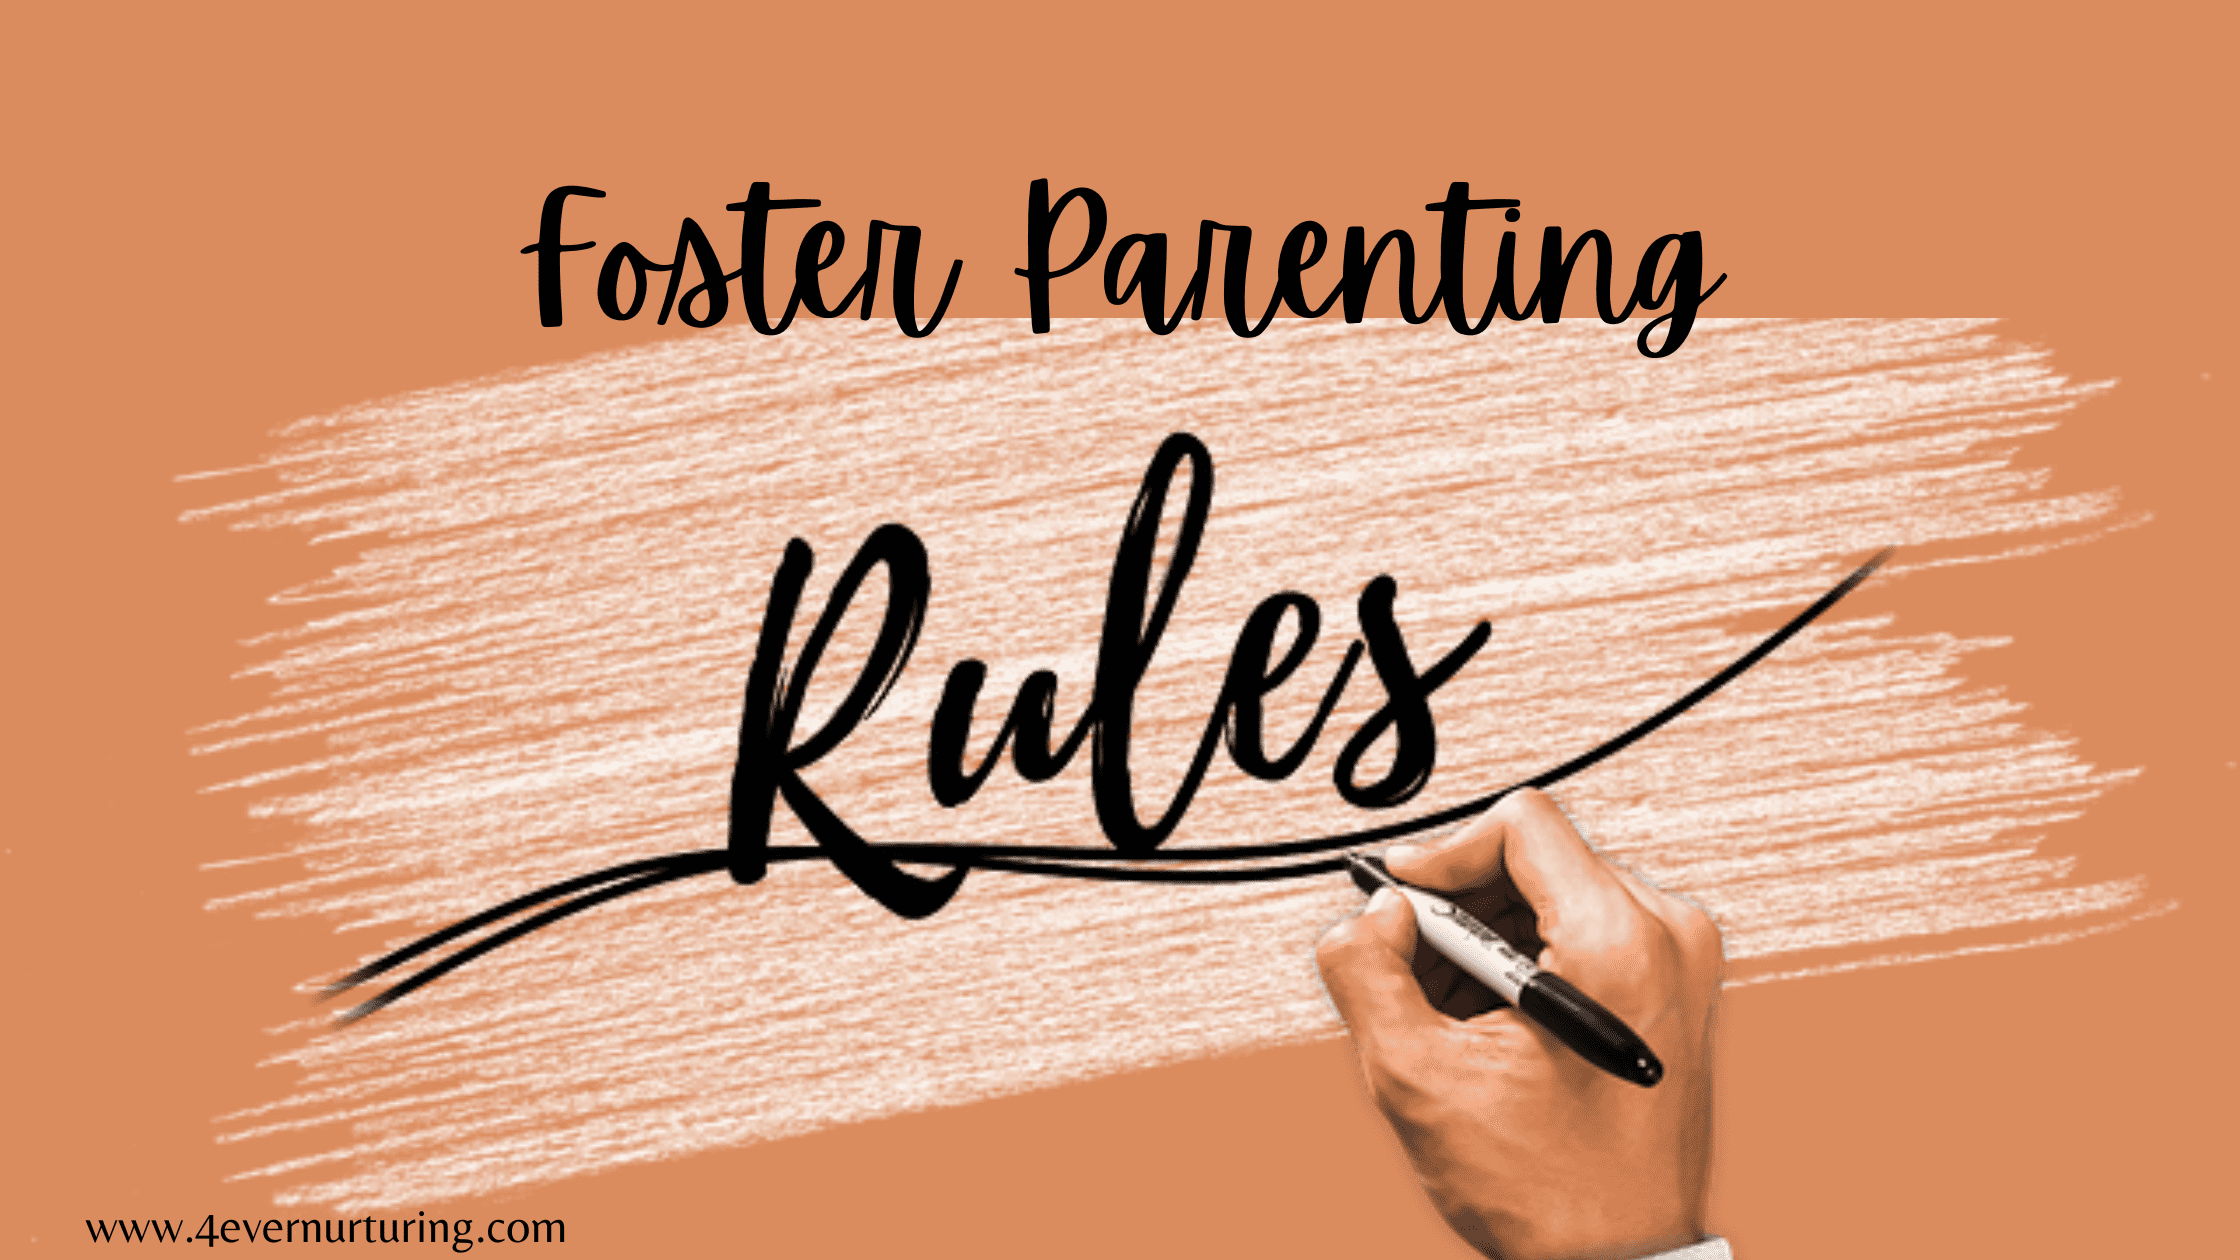 What Happens If a Foster Parent Breaks the Rules